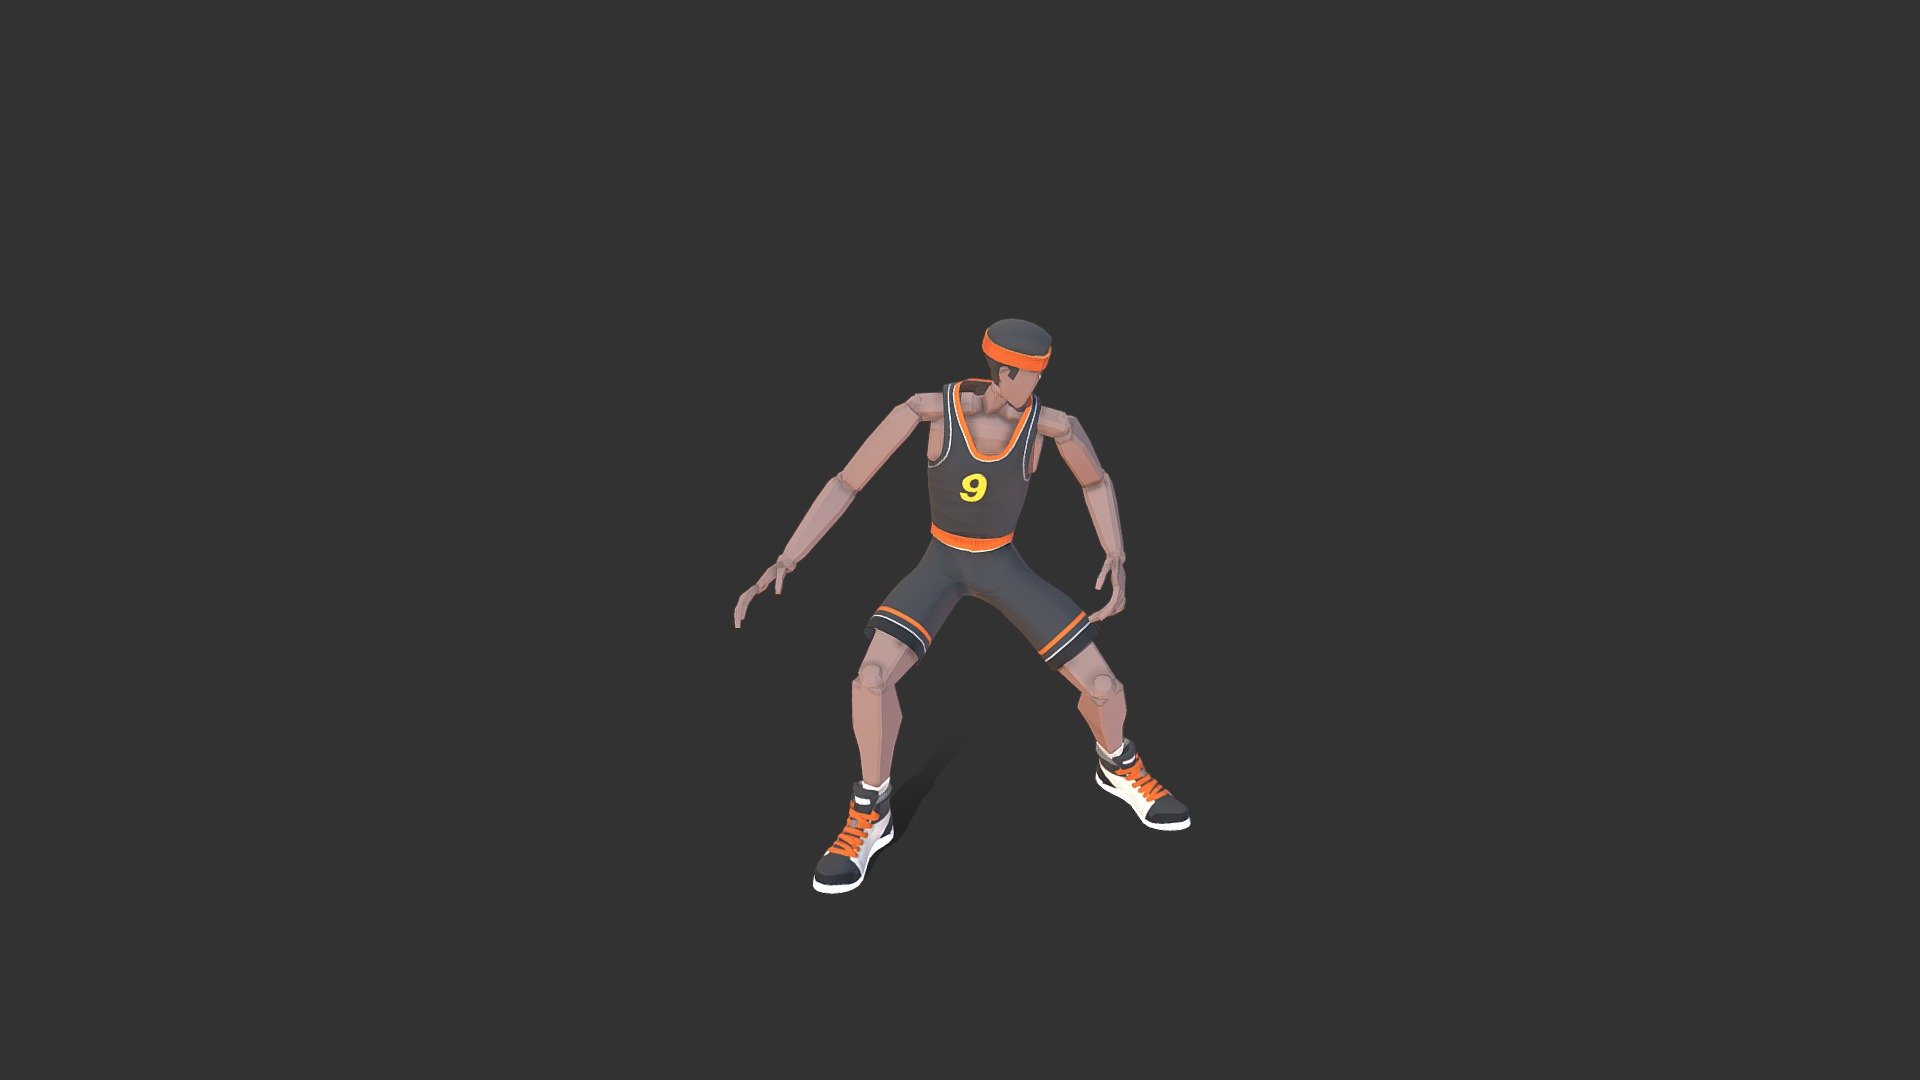 [Basketball8] Run and Move 1 - 3D model by Studio33Interactive 3d model